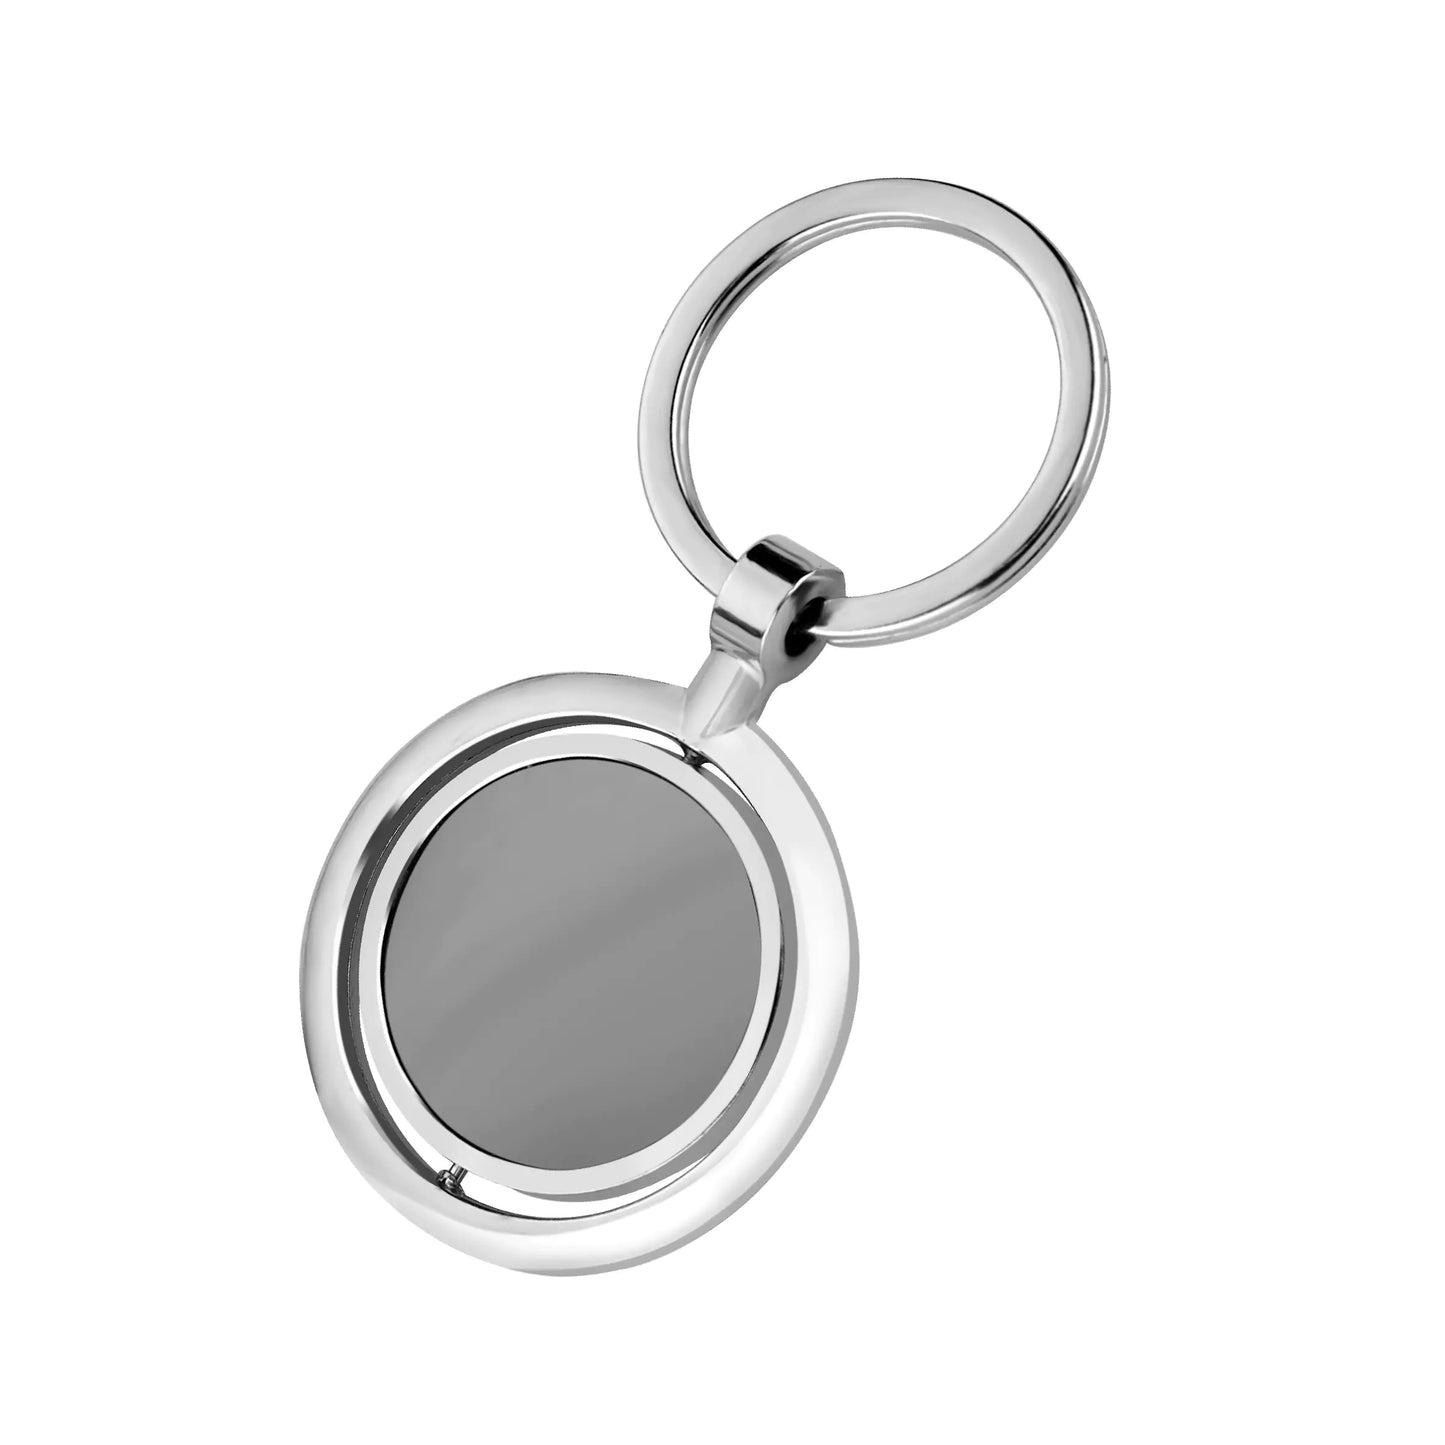 Rotating Steel Finish Metal Keychain - For Employee, Client, Dealer, or Corporate Gifting, Events Promotional Freebie JKC12